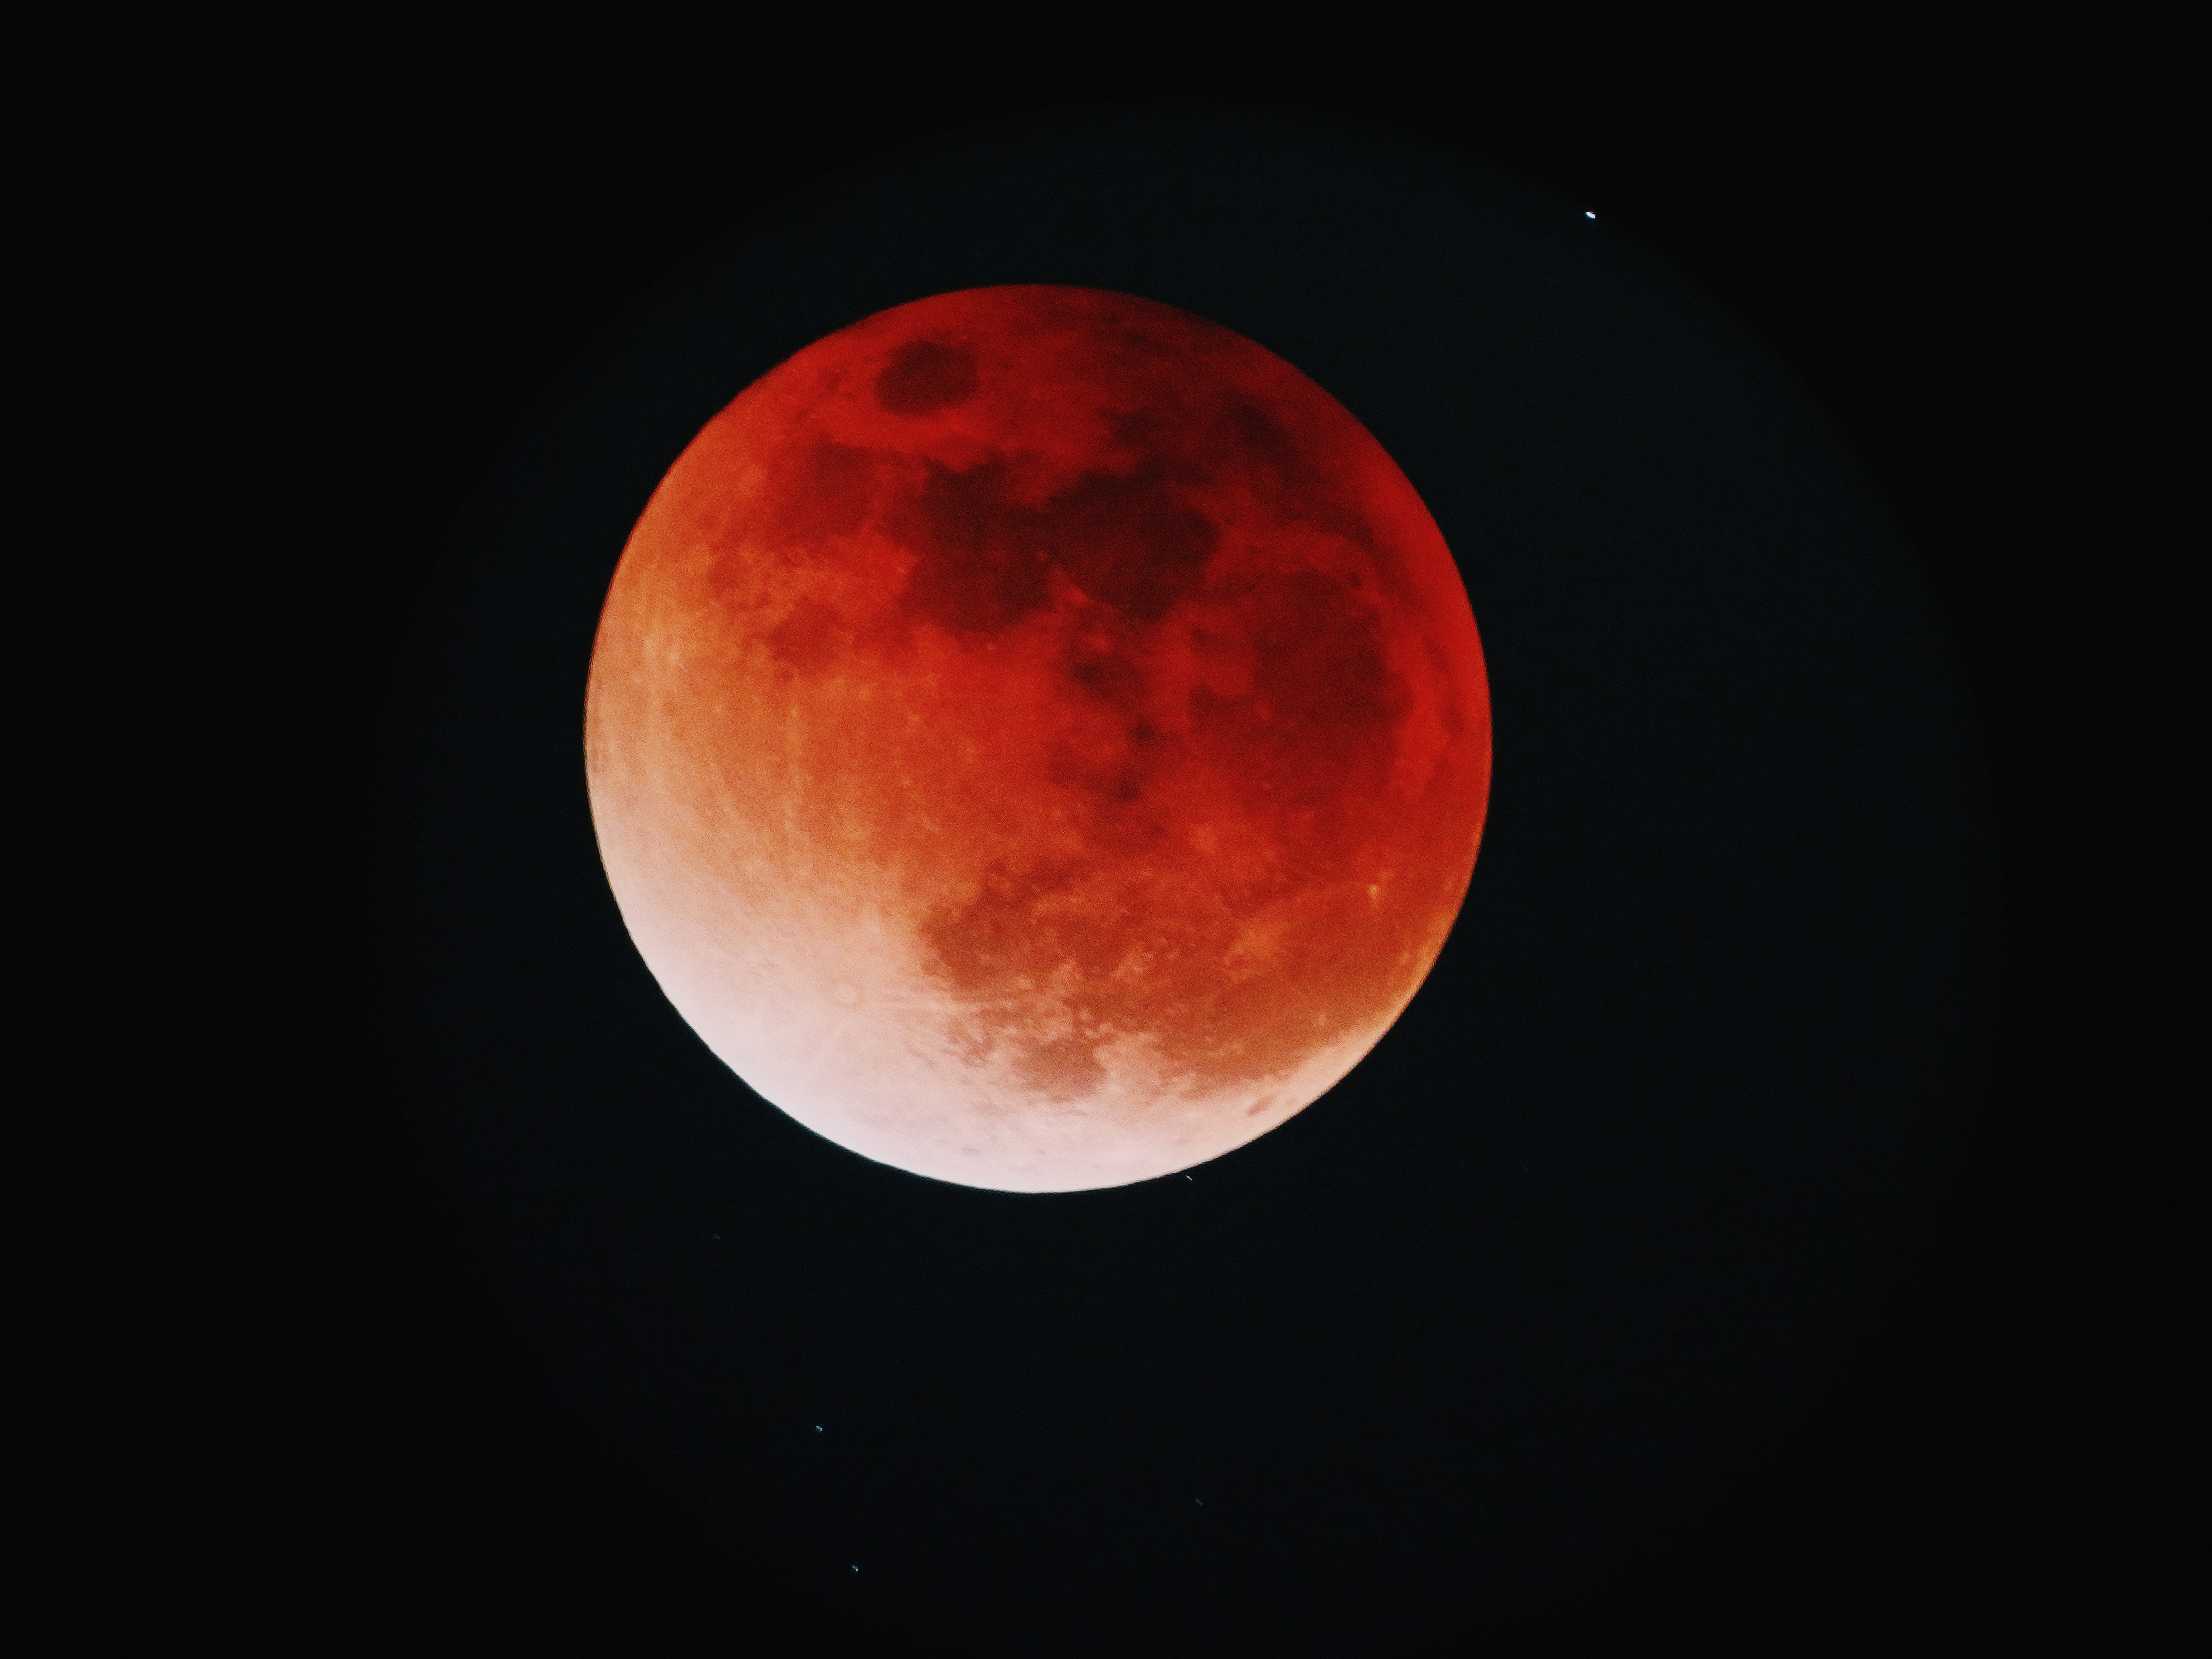 Get Moon Gazing: The Year’s Second Total Lunar Eclipse Will Be Visible from Beijing, Nov 8